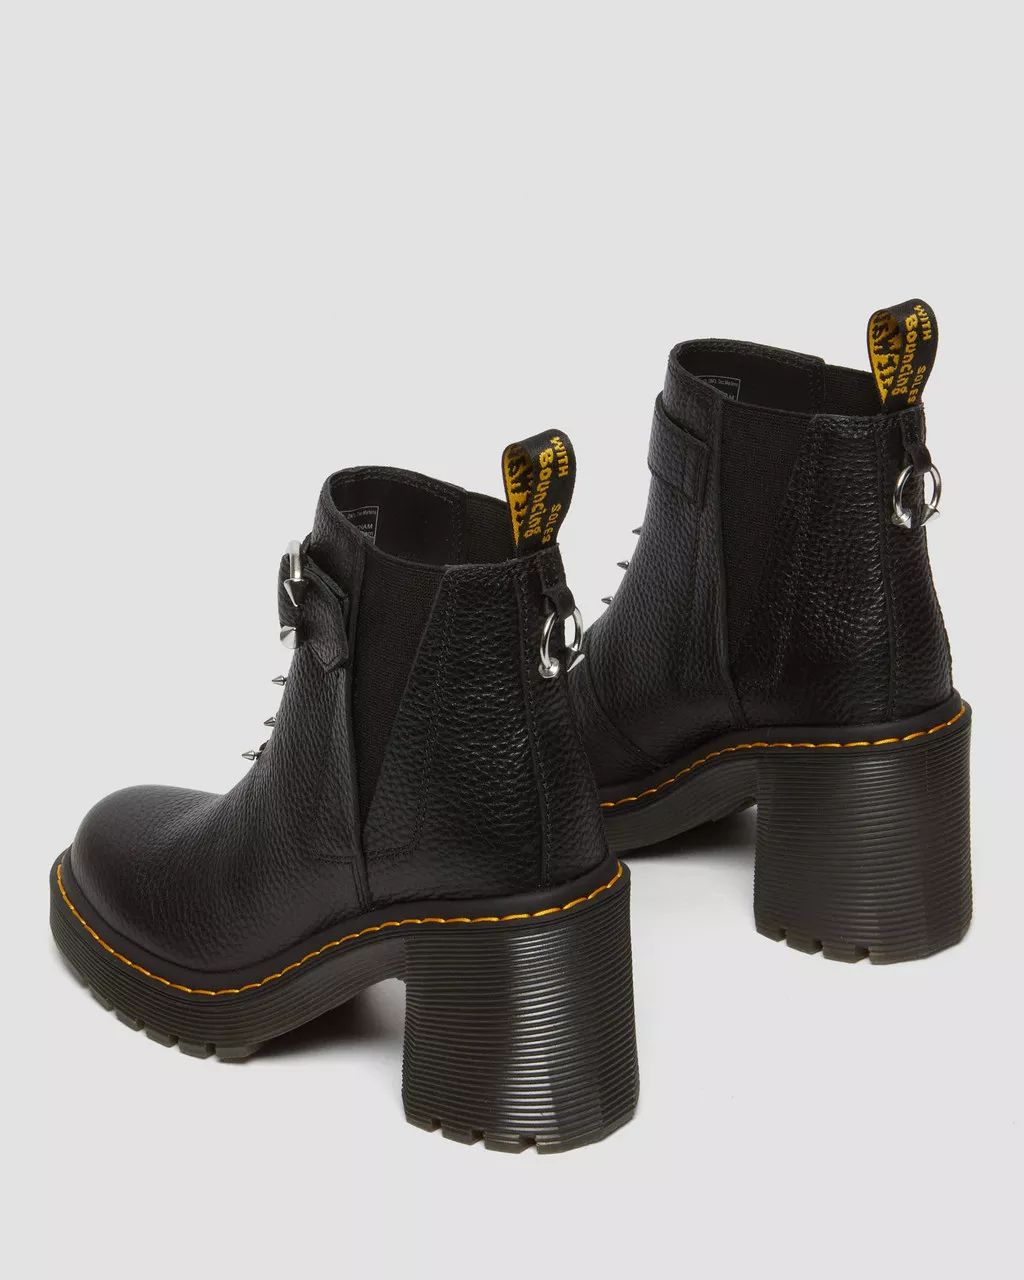 Spence Piercing Leather Flared Heel Chelsea Boots | Dr. Martens